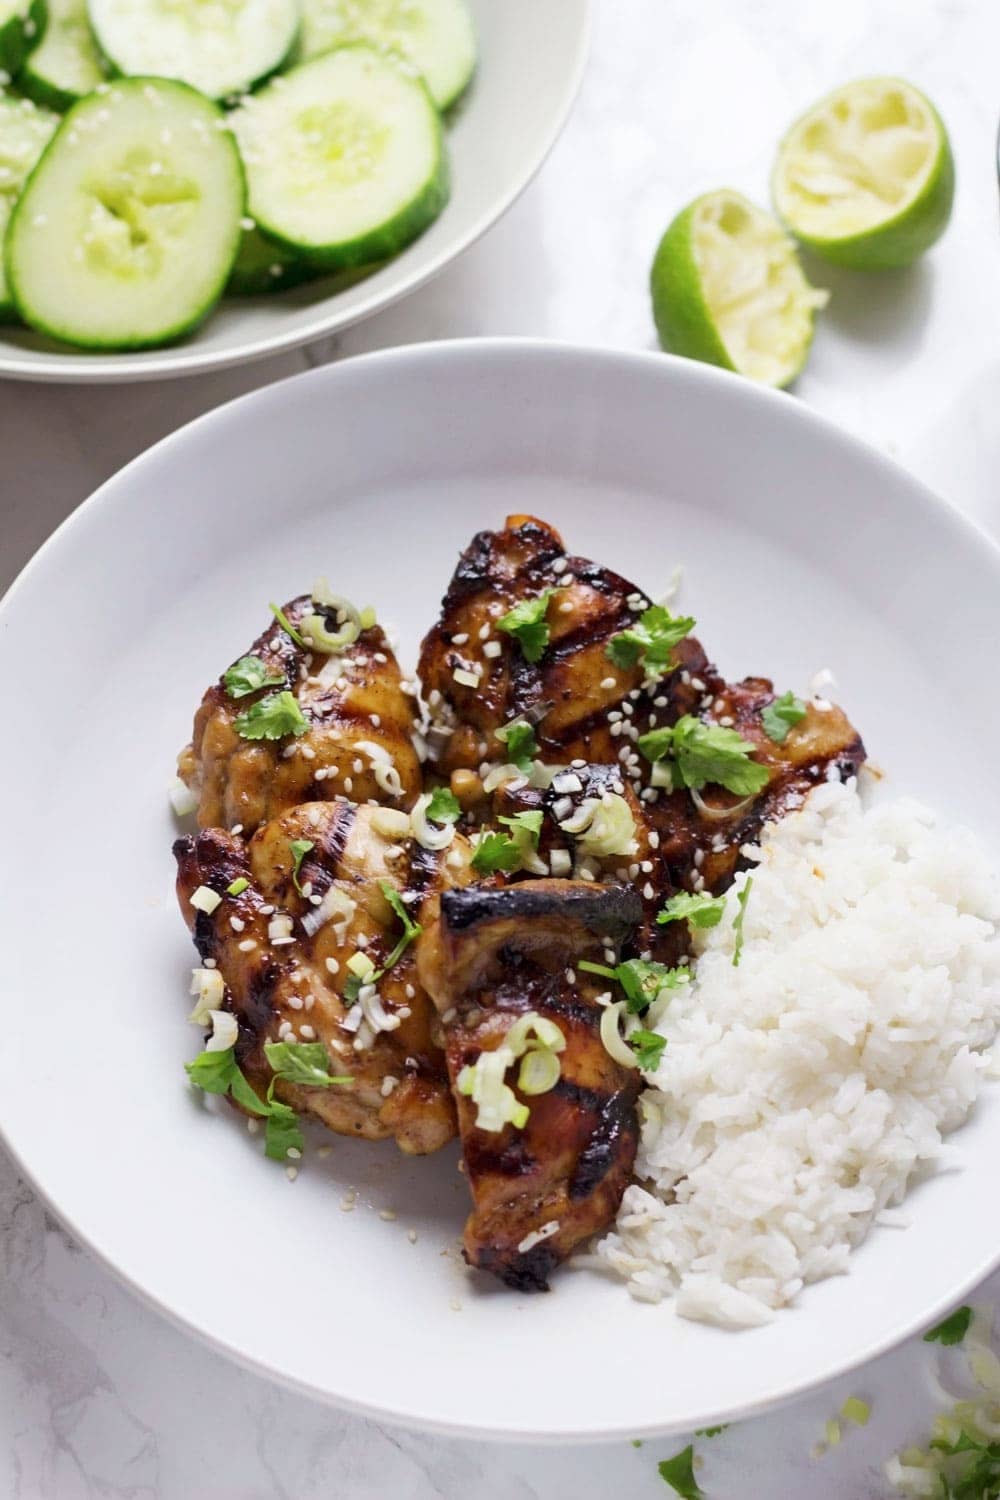 This grilled chicken with peanut sauce is served with a cooling sesame cucumber salad. The recipe requires minimal fuss and feels super indulgent!